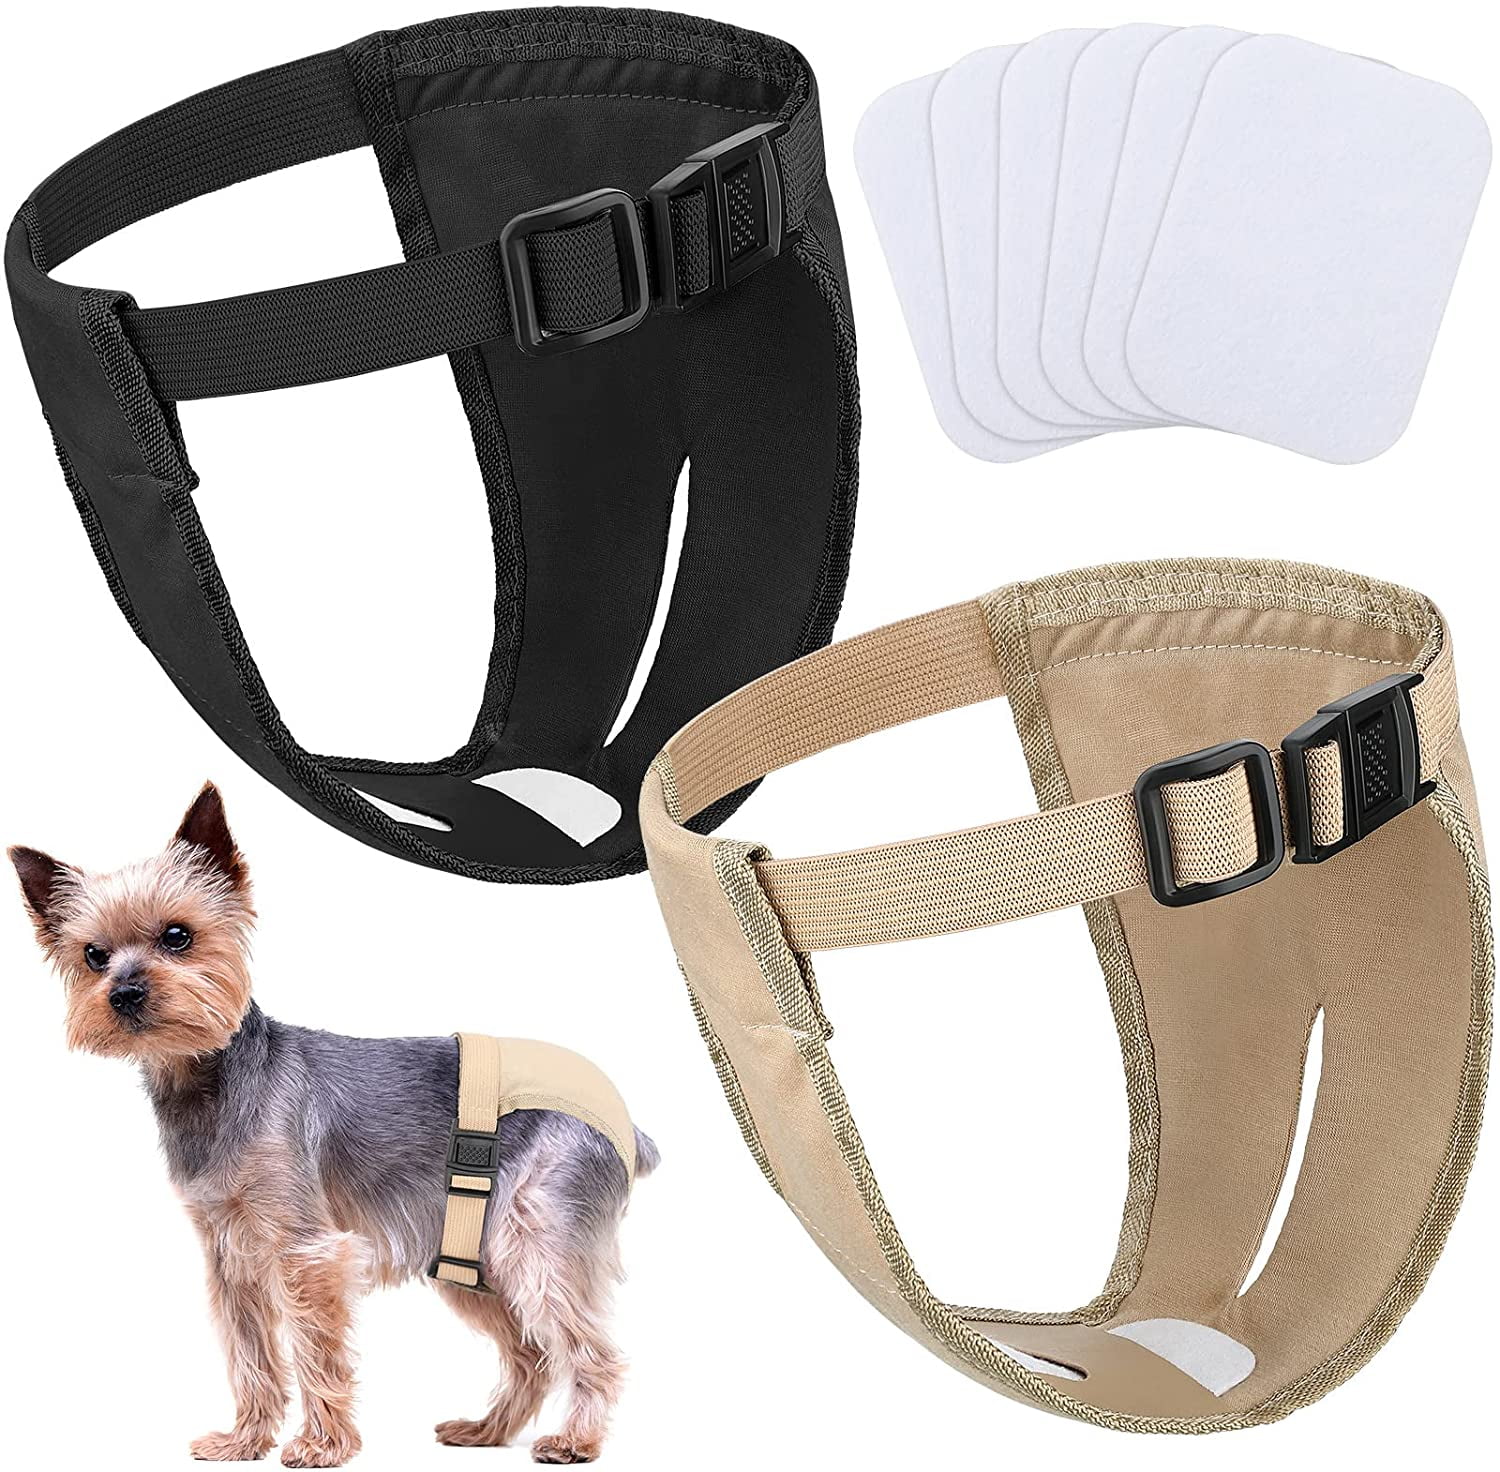  Pet Physiological Pants The Dog Safety Pants Cotton : Pet  Supplies